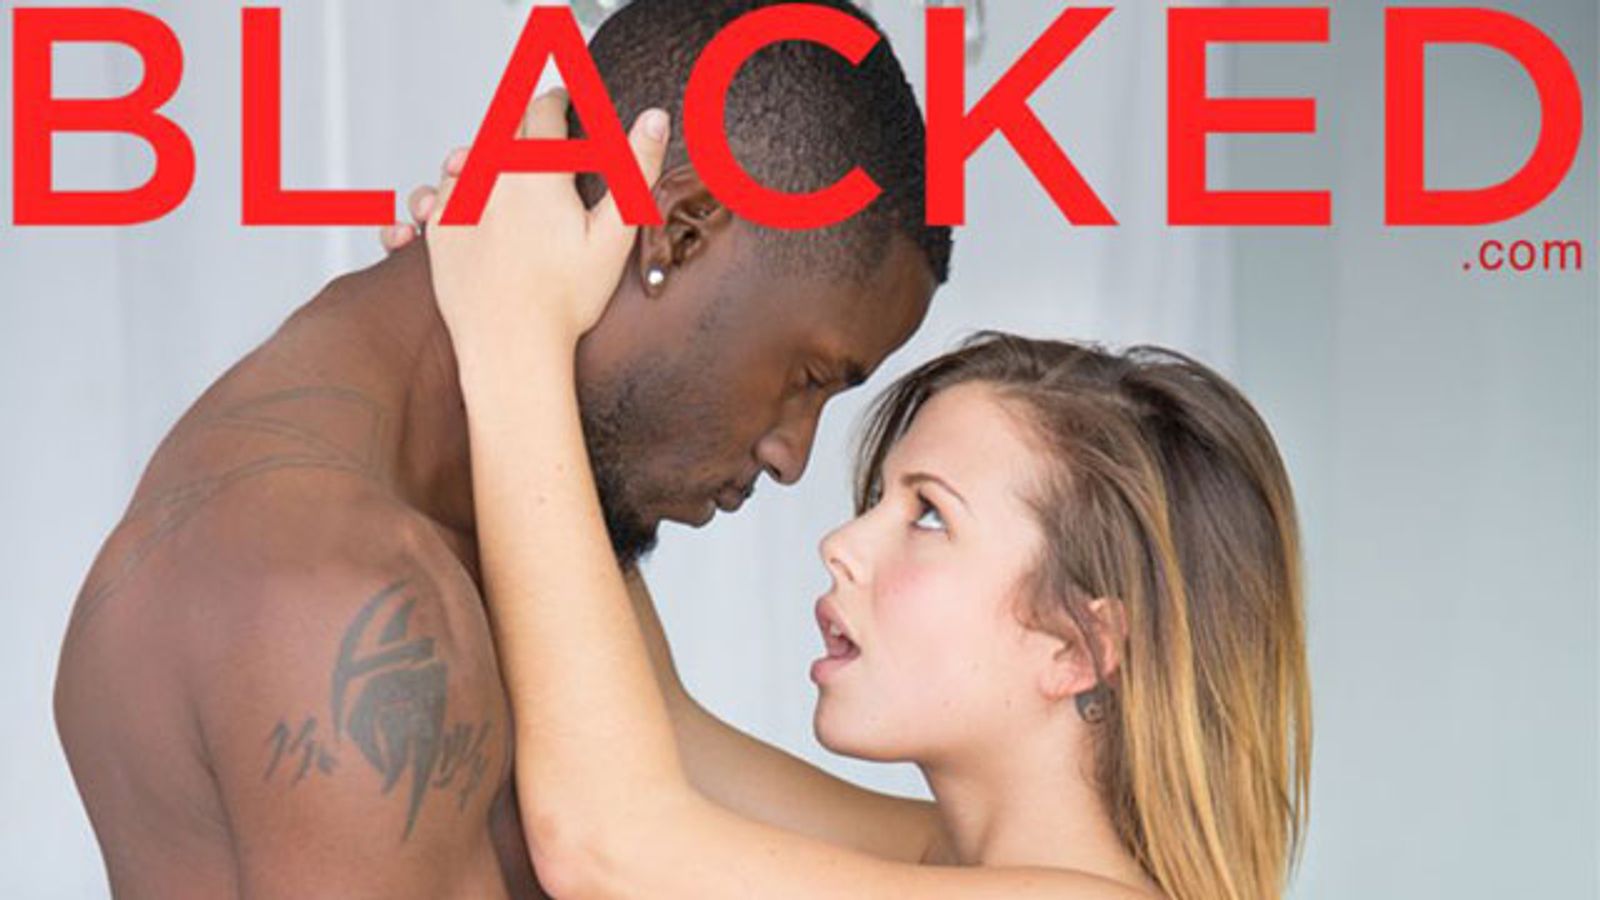 Interracial Site Blacked.com Launches